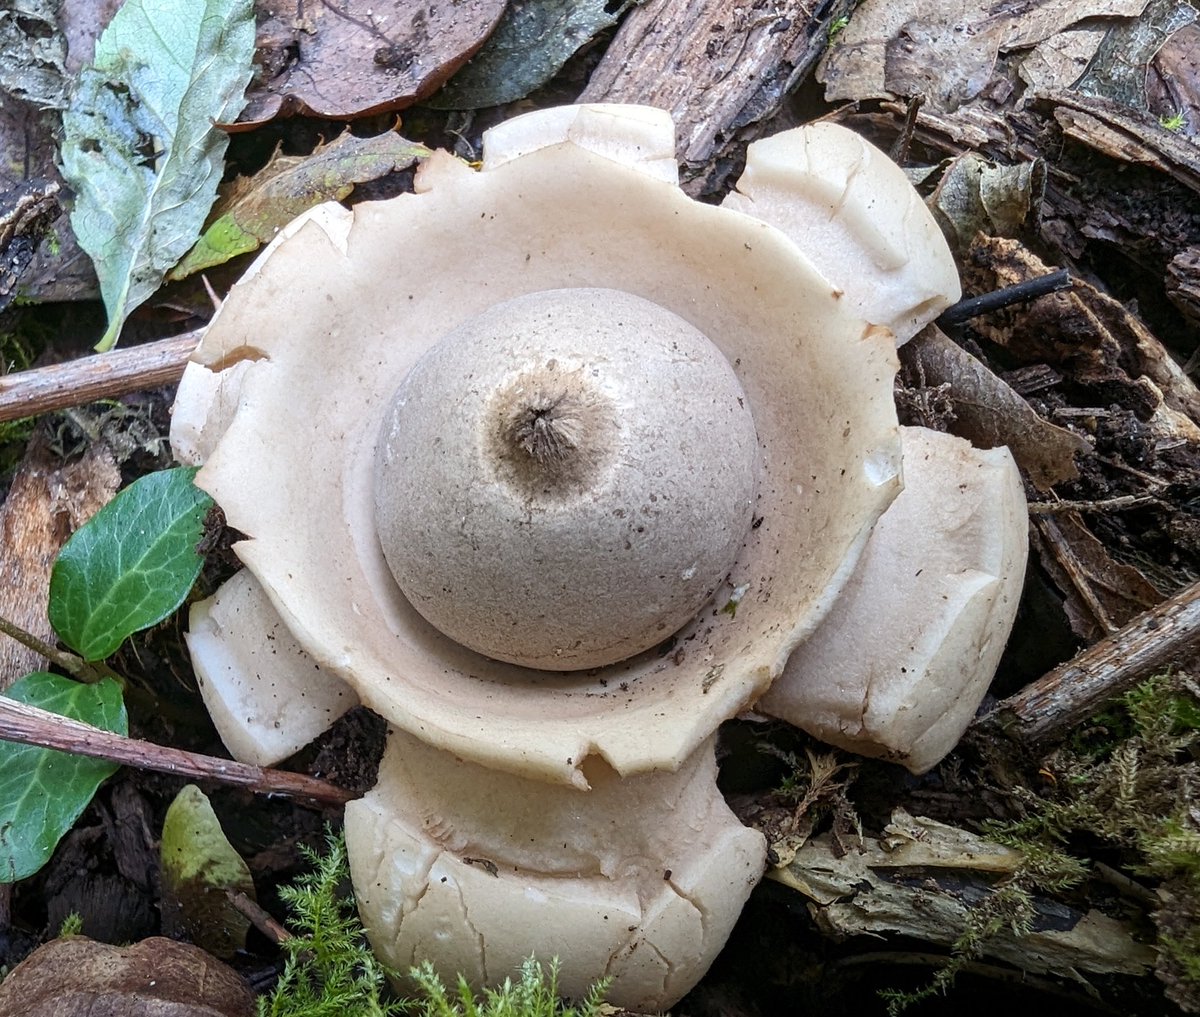 So excited to spot a small collection of Collared earthstars (Geastrum triplex) in Lower Woods Nature Reserve yesterday 🤩 #MushroomMonday #UKFungusDay #Fungi #Mycology #mushrooms #woodland #Autumn